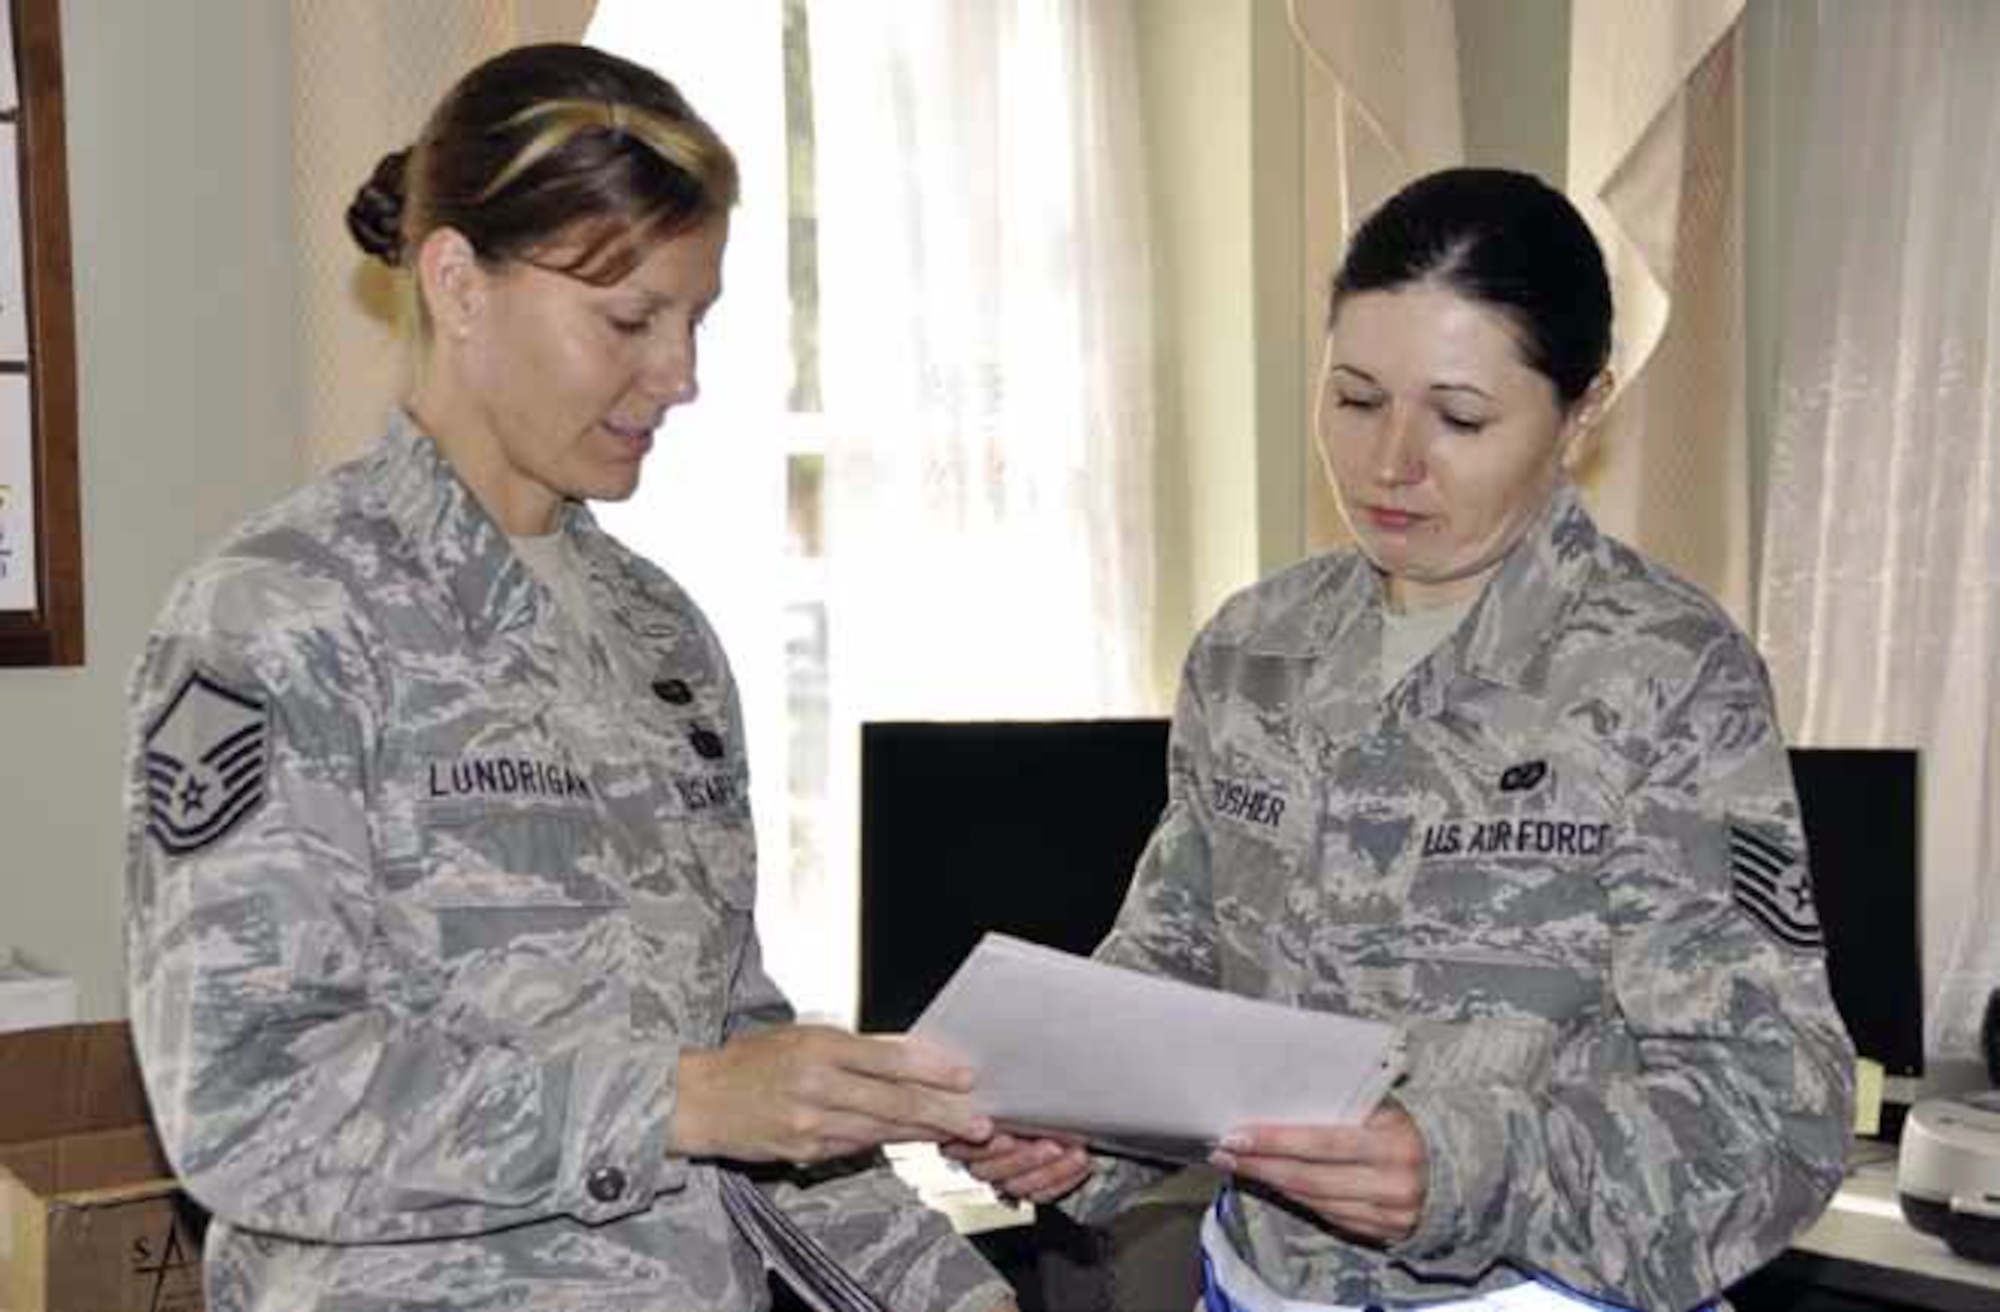 Master Sgt. Kelley Lundrigan (left) 452d Air Mobility Wing unit deployment manager, explains inspection-specific requirements to Tech. Sgt. Megan Crusher, 452d AMW public affairs, during deployment processing, in preparation for the Operational Readiness Inspection, held at Gulfport, Miss., from Jan. 28 to Feb. 2. (U.S. Air Force photo by Master Sgt. Linda Welz)